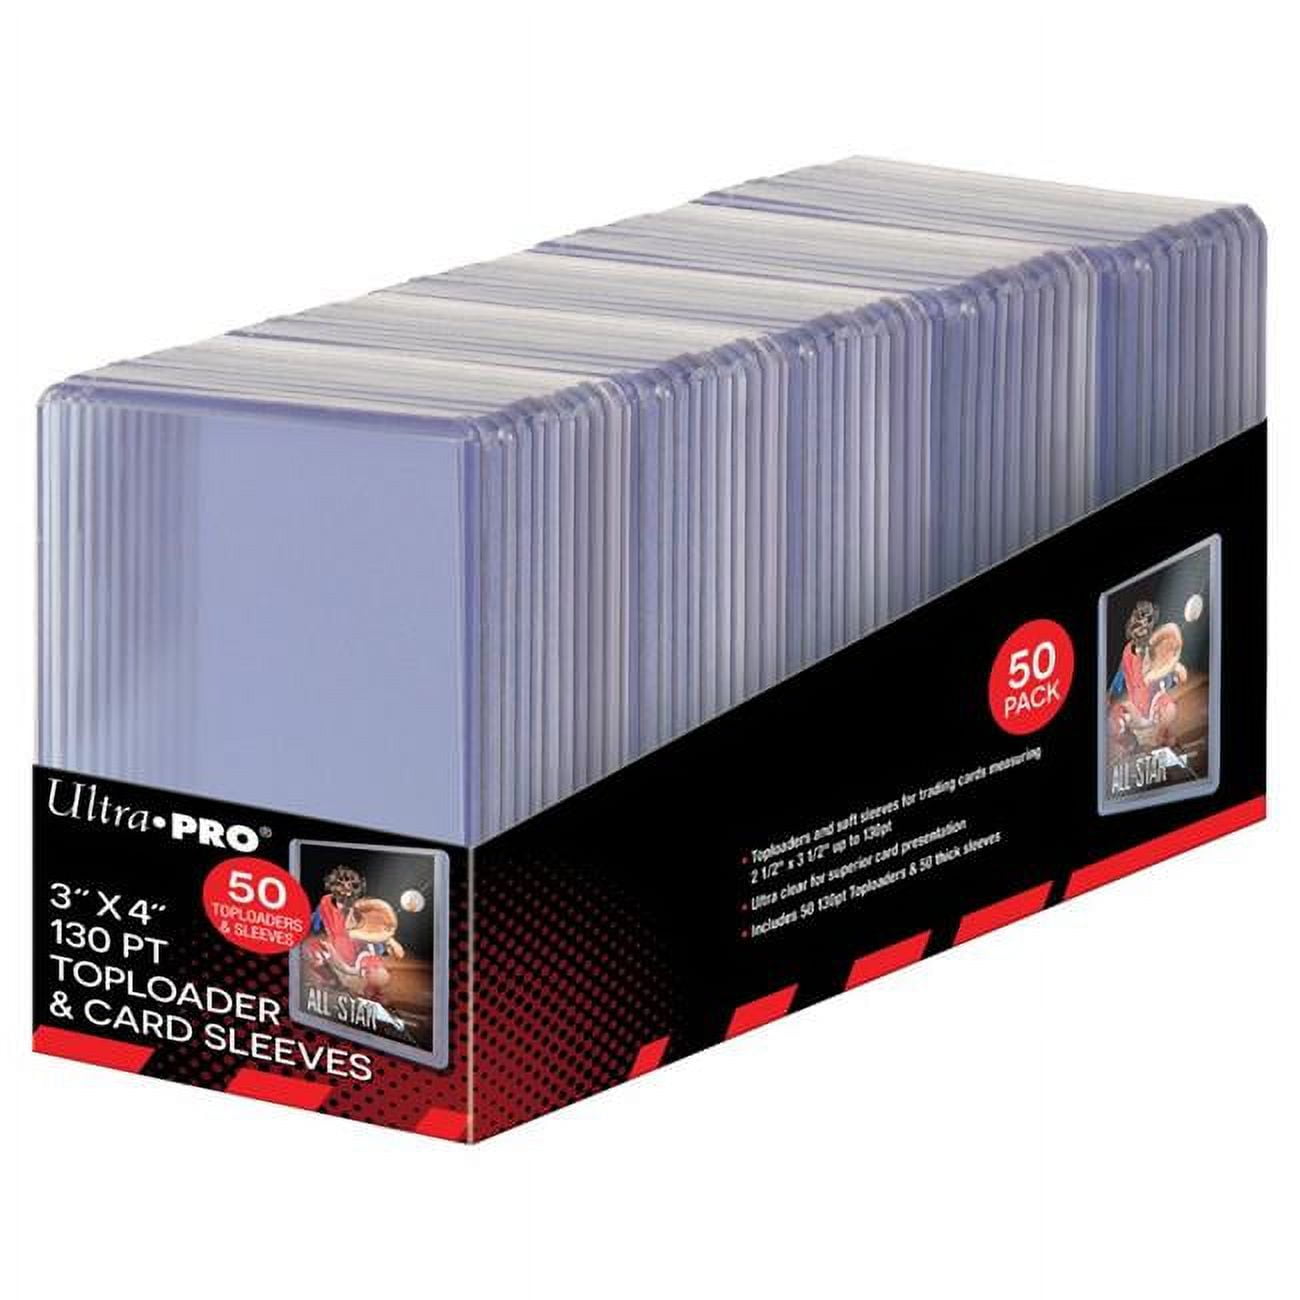 Picture of Ultra Pro 7442715285 3 x 4 in. Super Thick 130PT Top Loader with Thick Card Sleeves, 50 per Pack